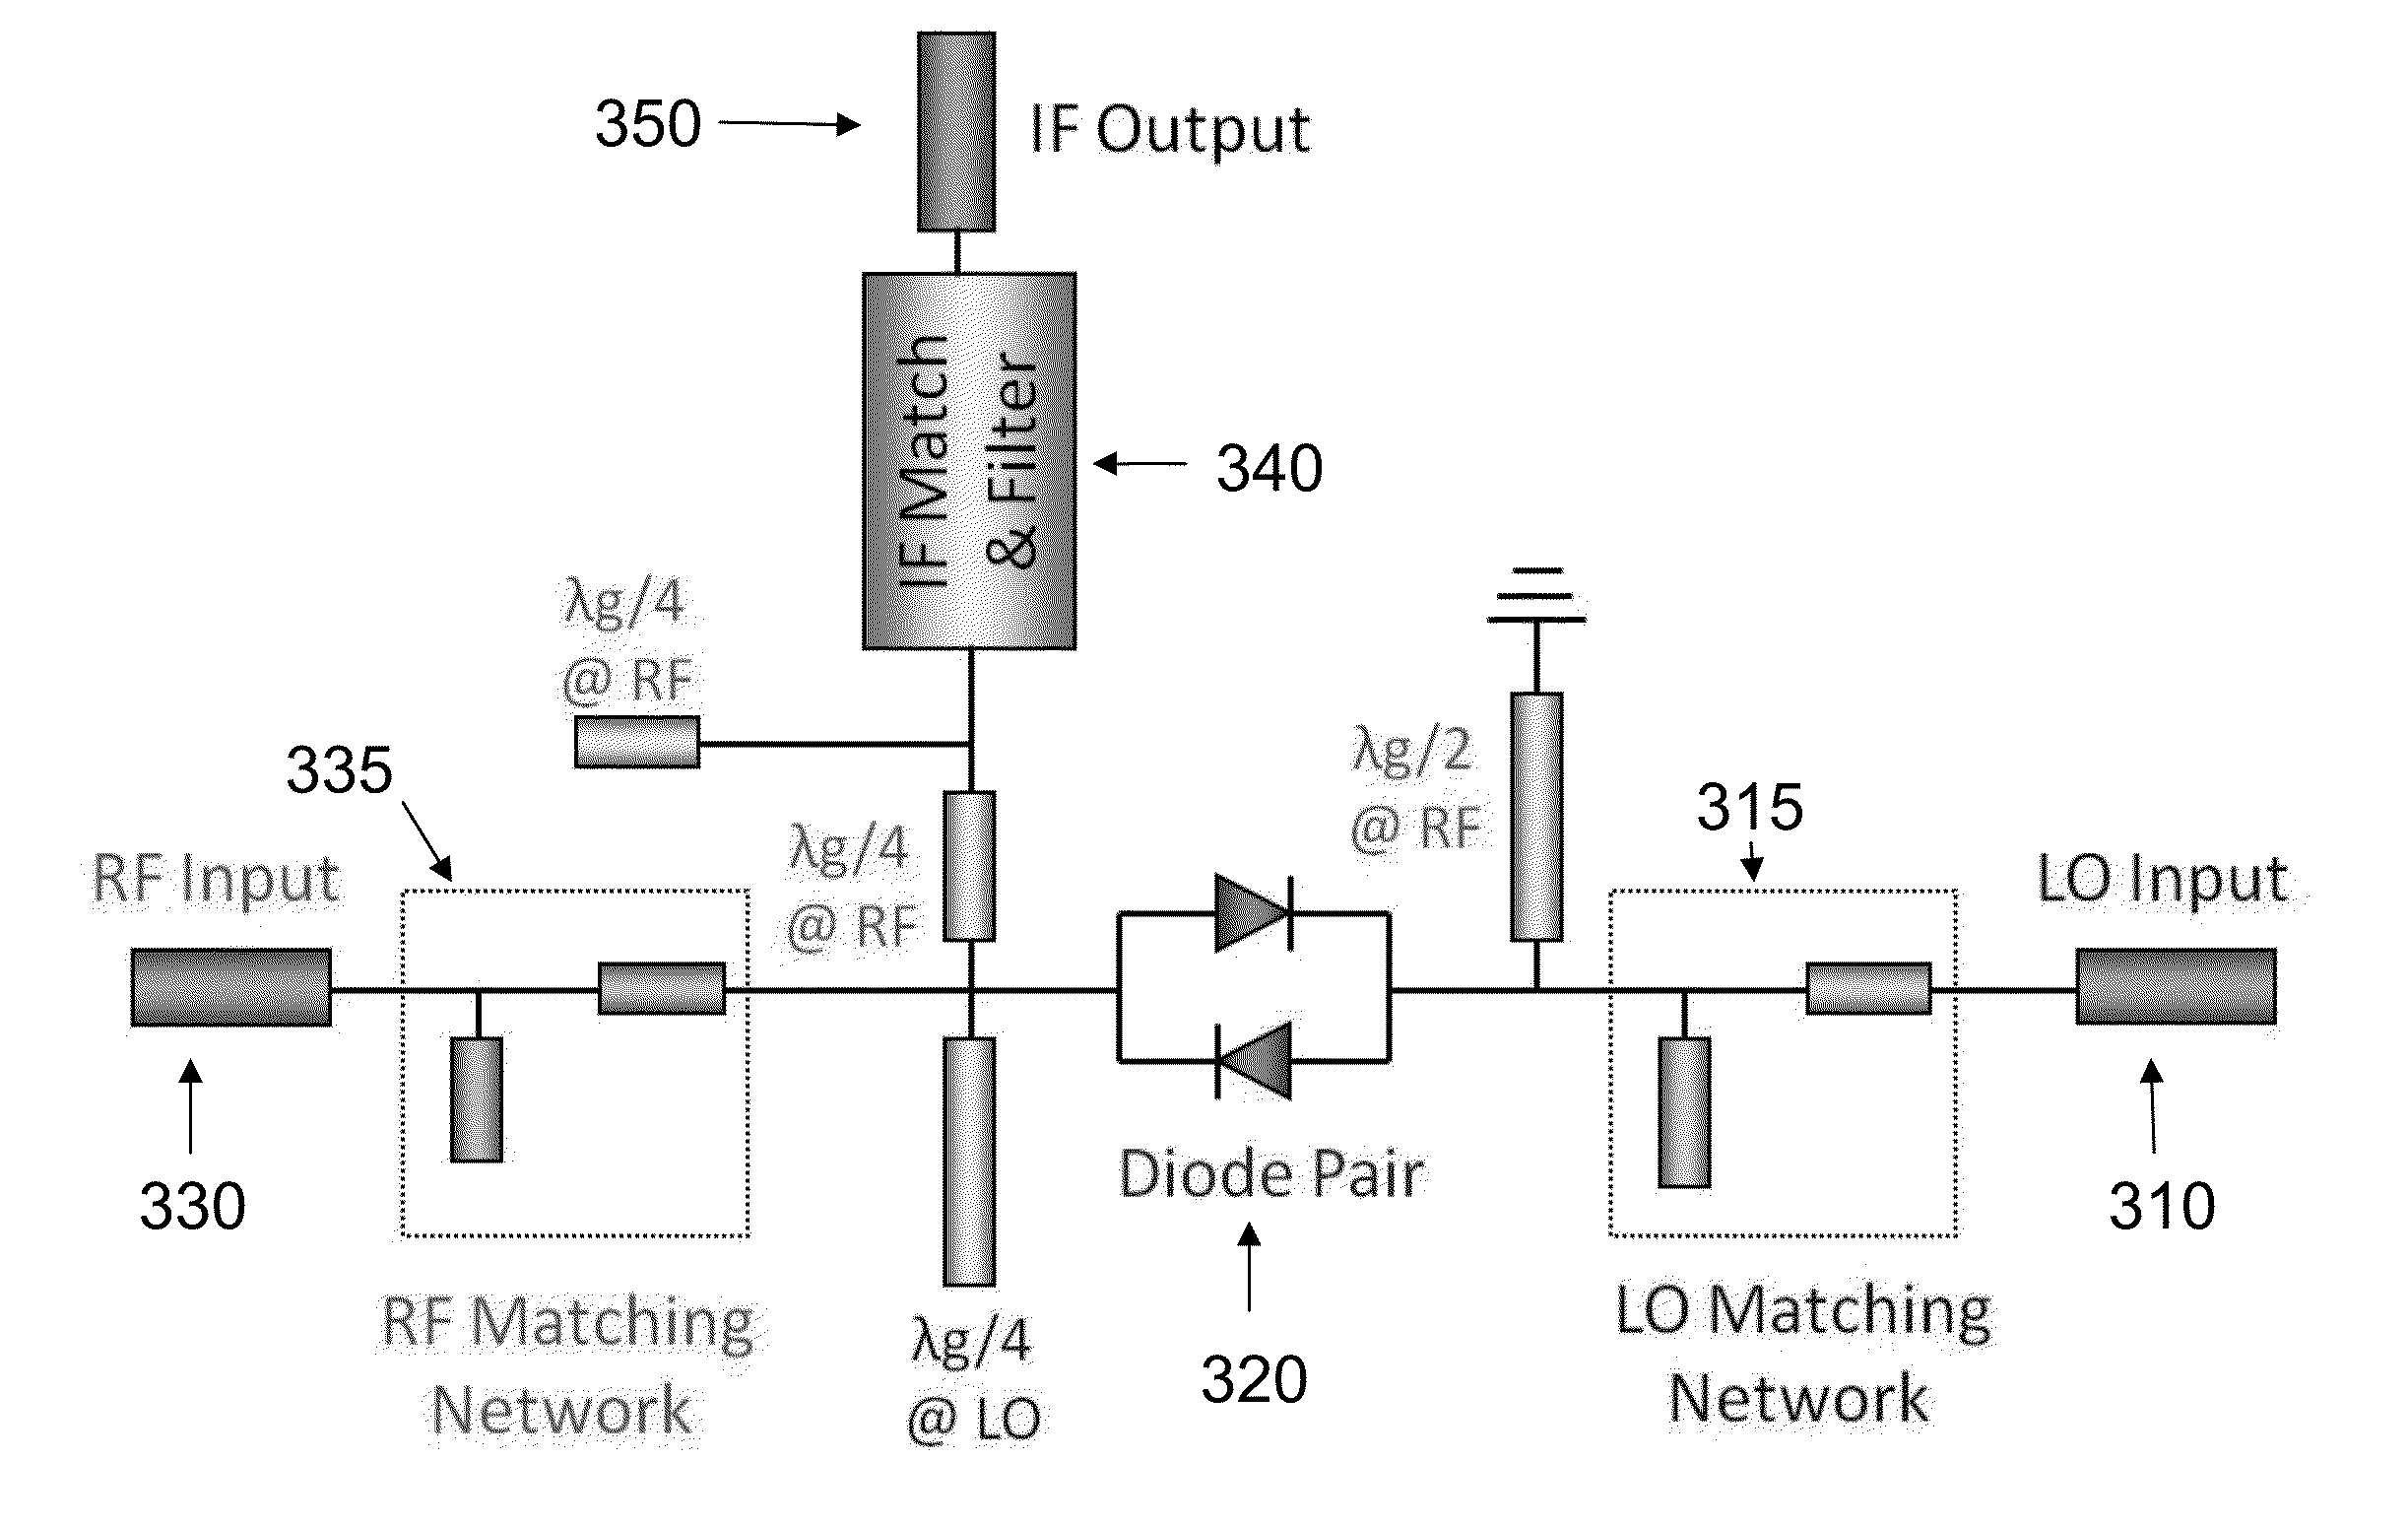 670 GHz Schottky diode based subharmonic mixer with CPW circuits and 70 GHz IF